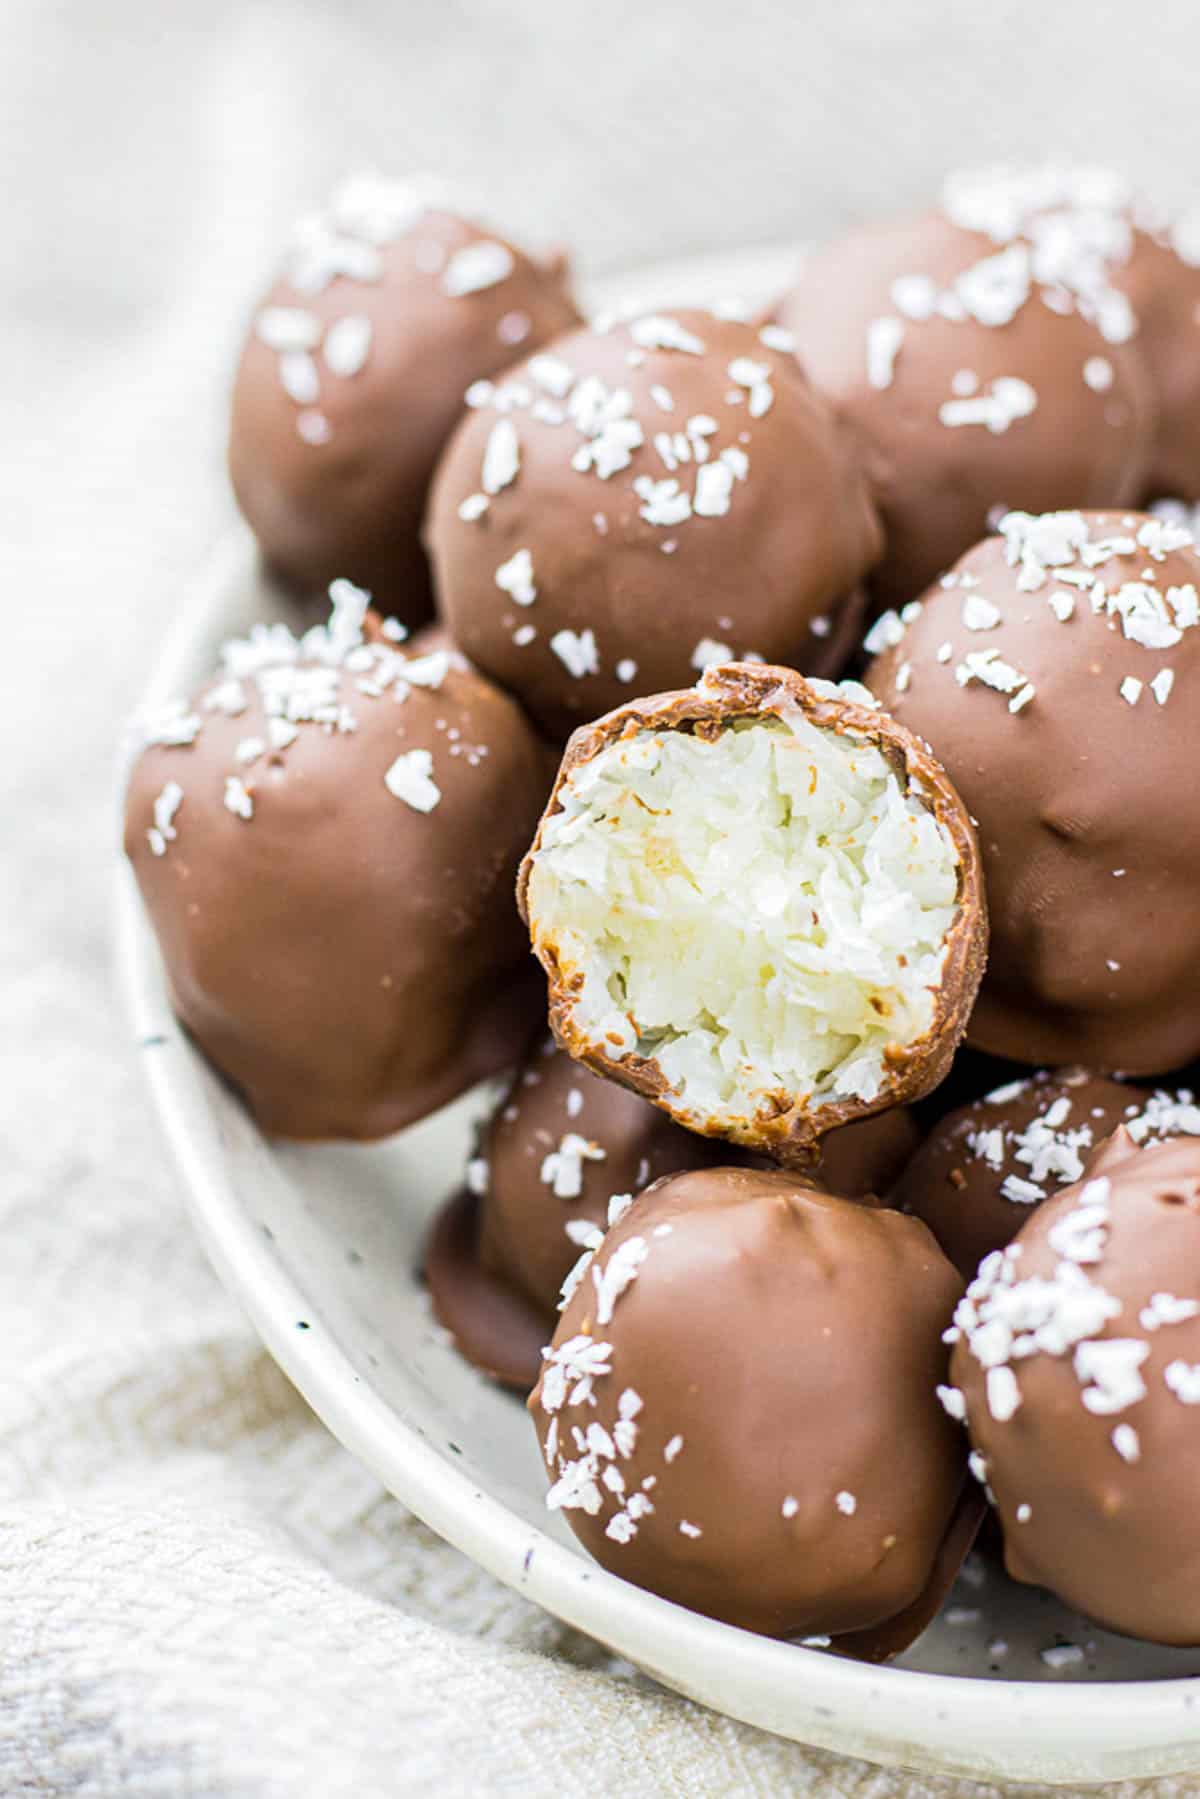 Chocolate covered coconut balls on a white plate.